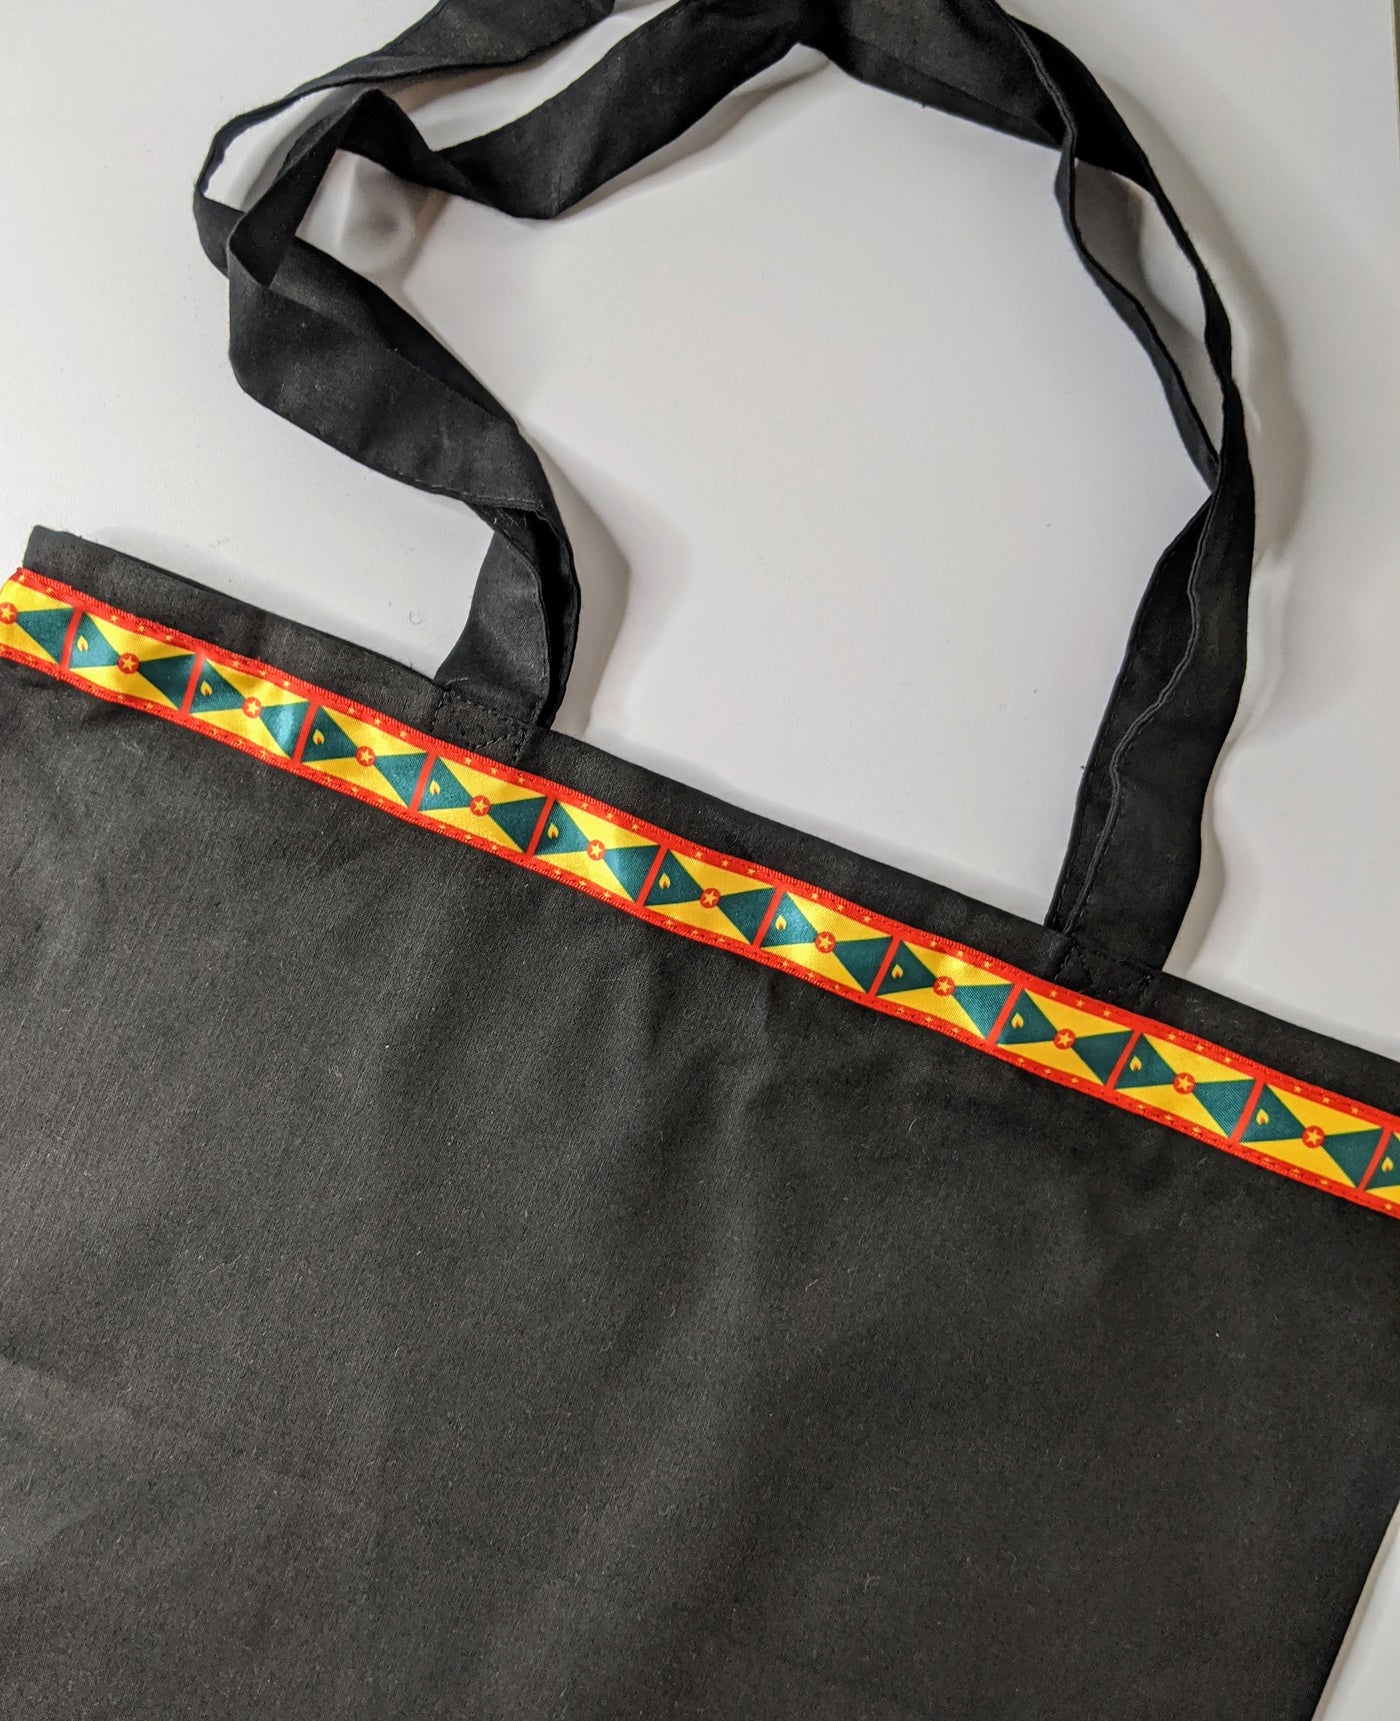 Black tote bag and purse with Grenada flag detail